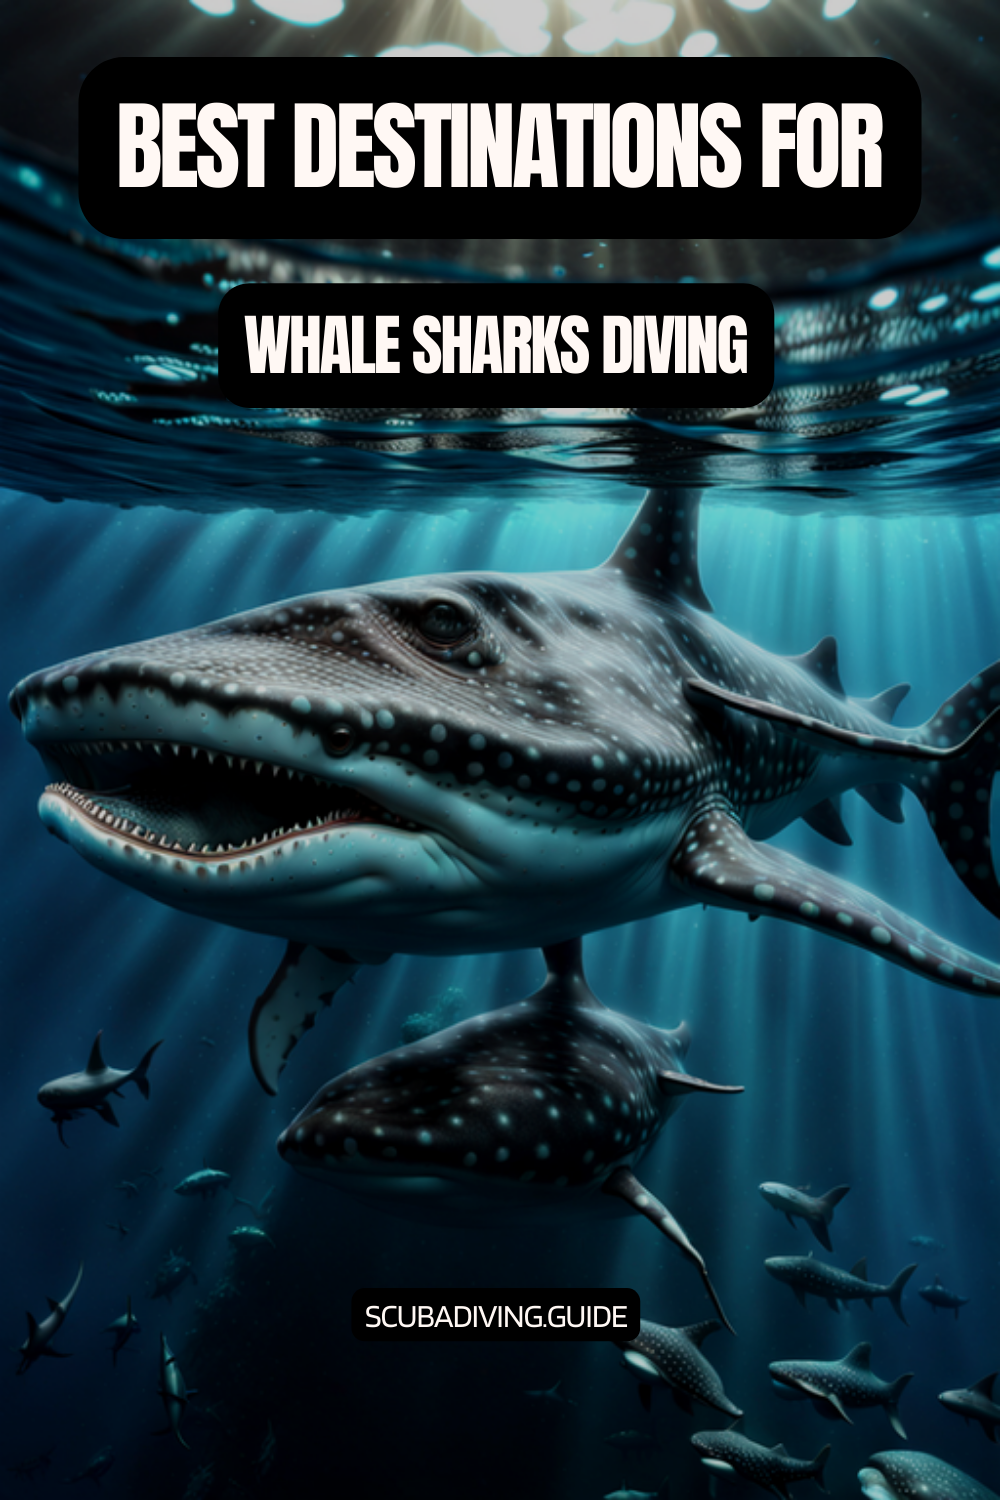 Best Destinations for Diving with Whale Sharks